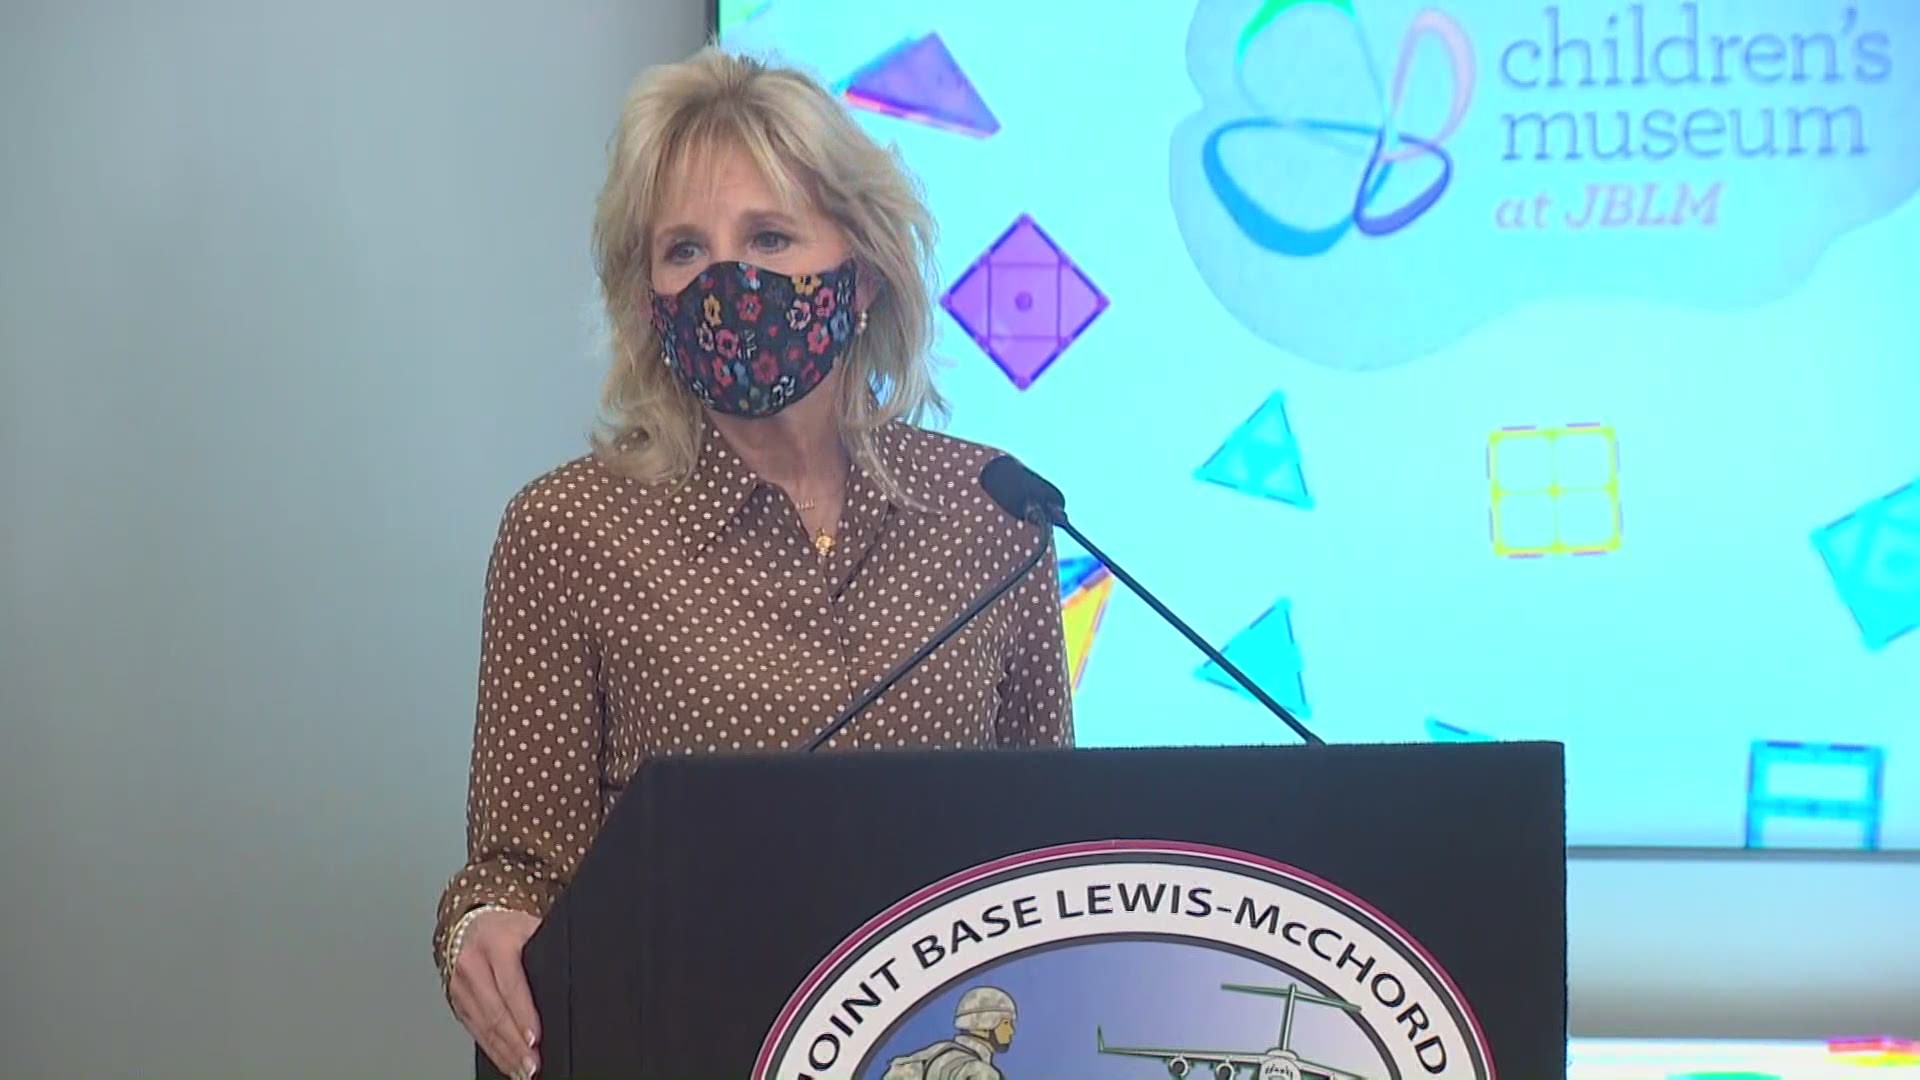 First Lady Dr. Jill Biden toured Joint Base Lewis-McChord Tuesday morning before speaking with military families about their experiences during the COVID-19 pandemic